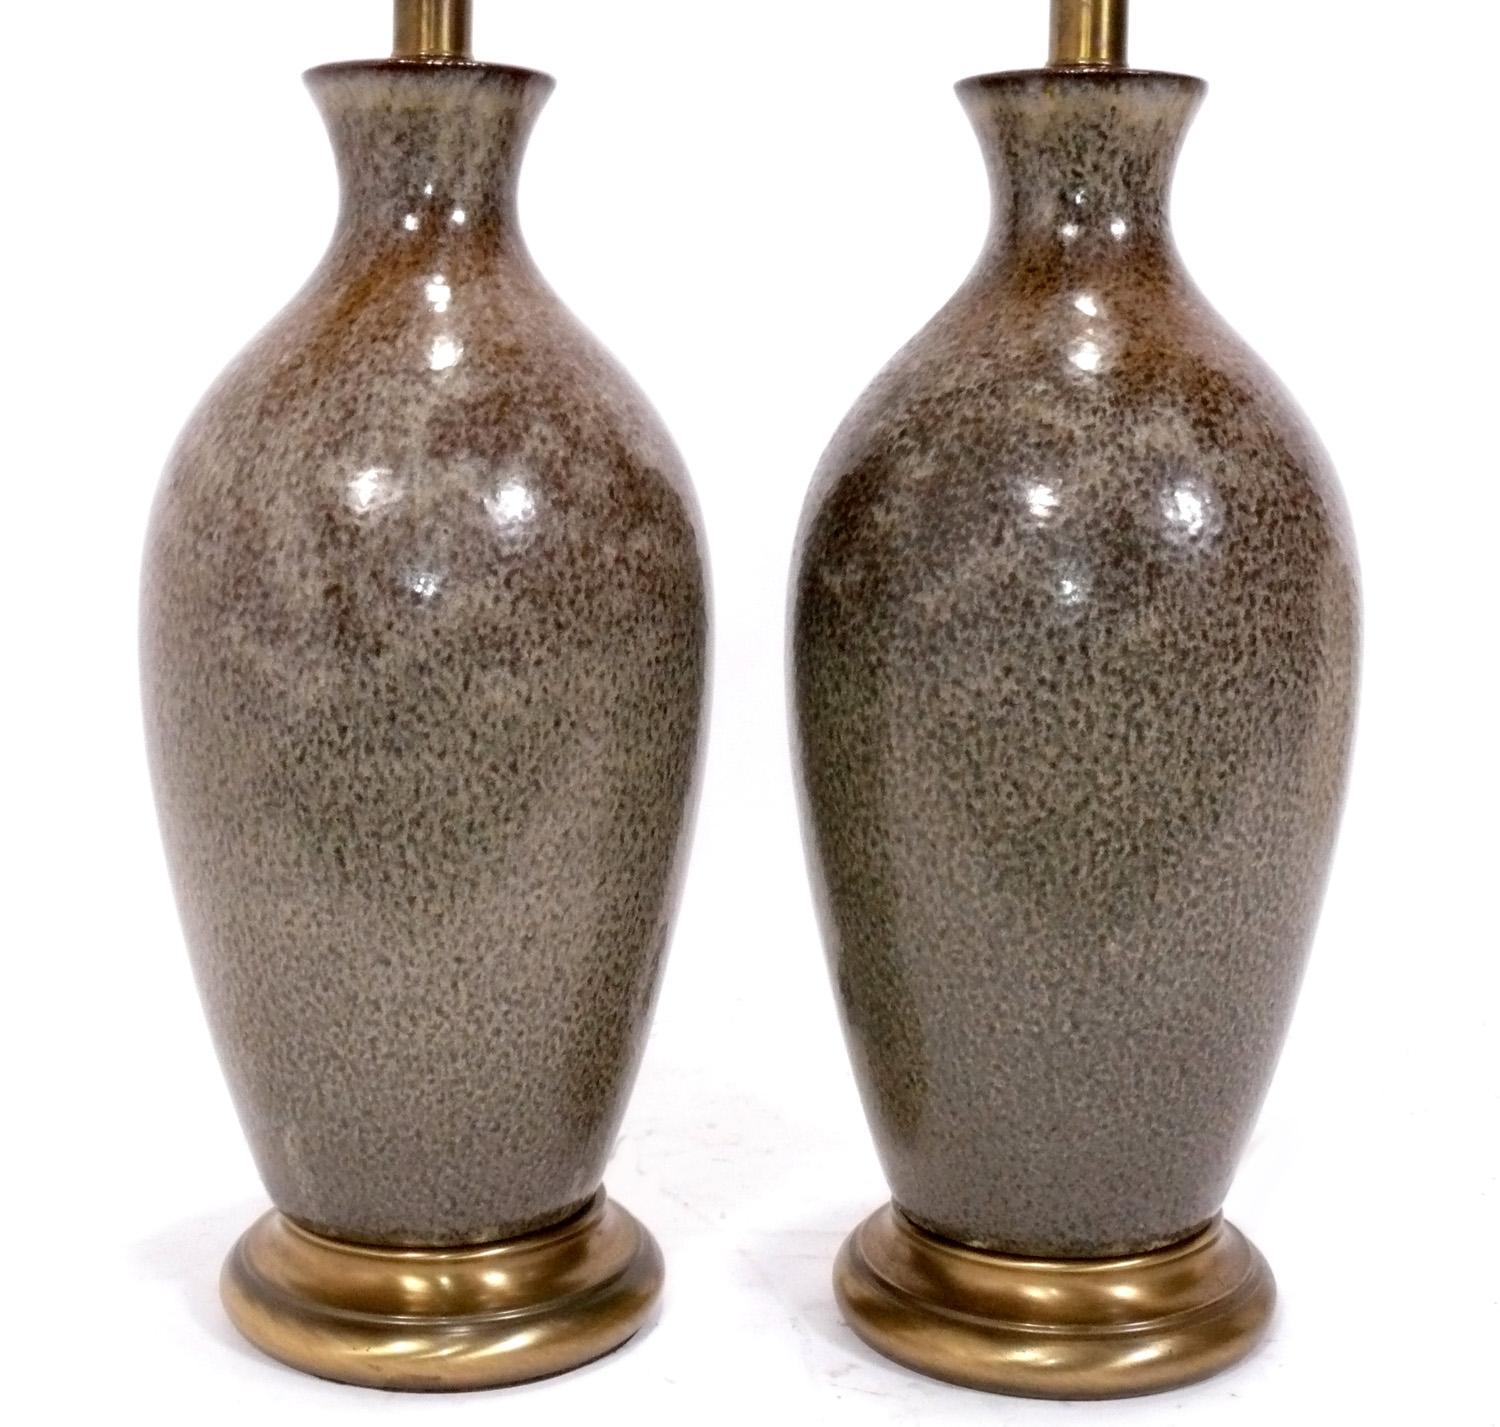 Pair of Elegant Mid Century Pottery Lamps with a Speckled Brown Glaze, American, circa 1950s. They have been rewired and are ready to use. The lamp shades are NOT included. 